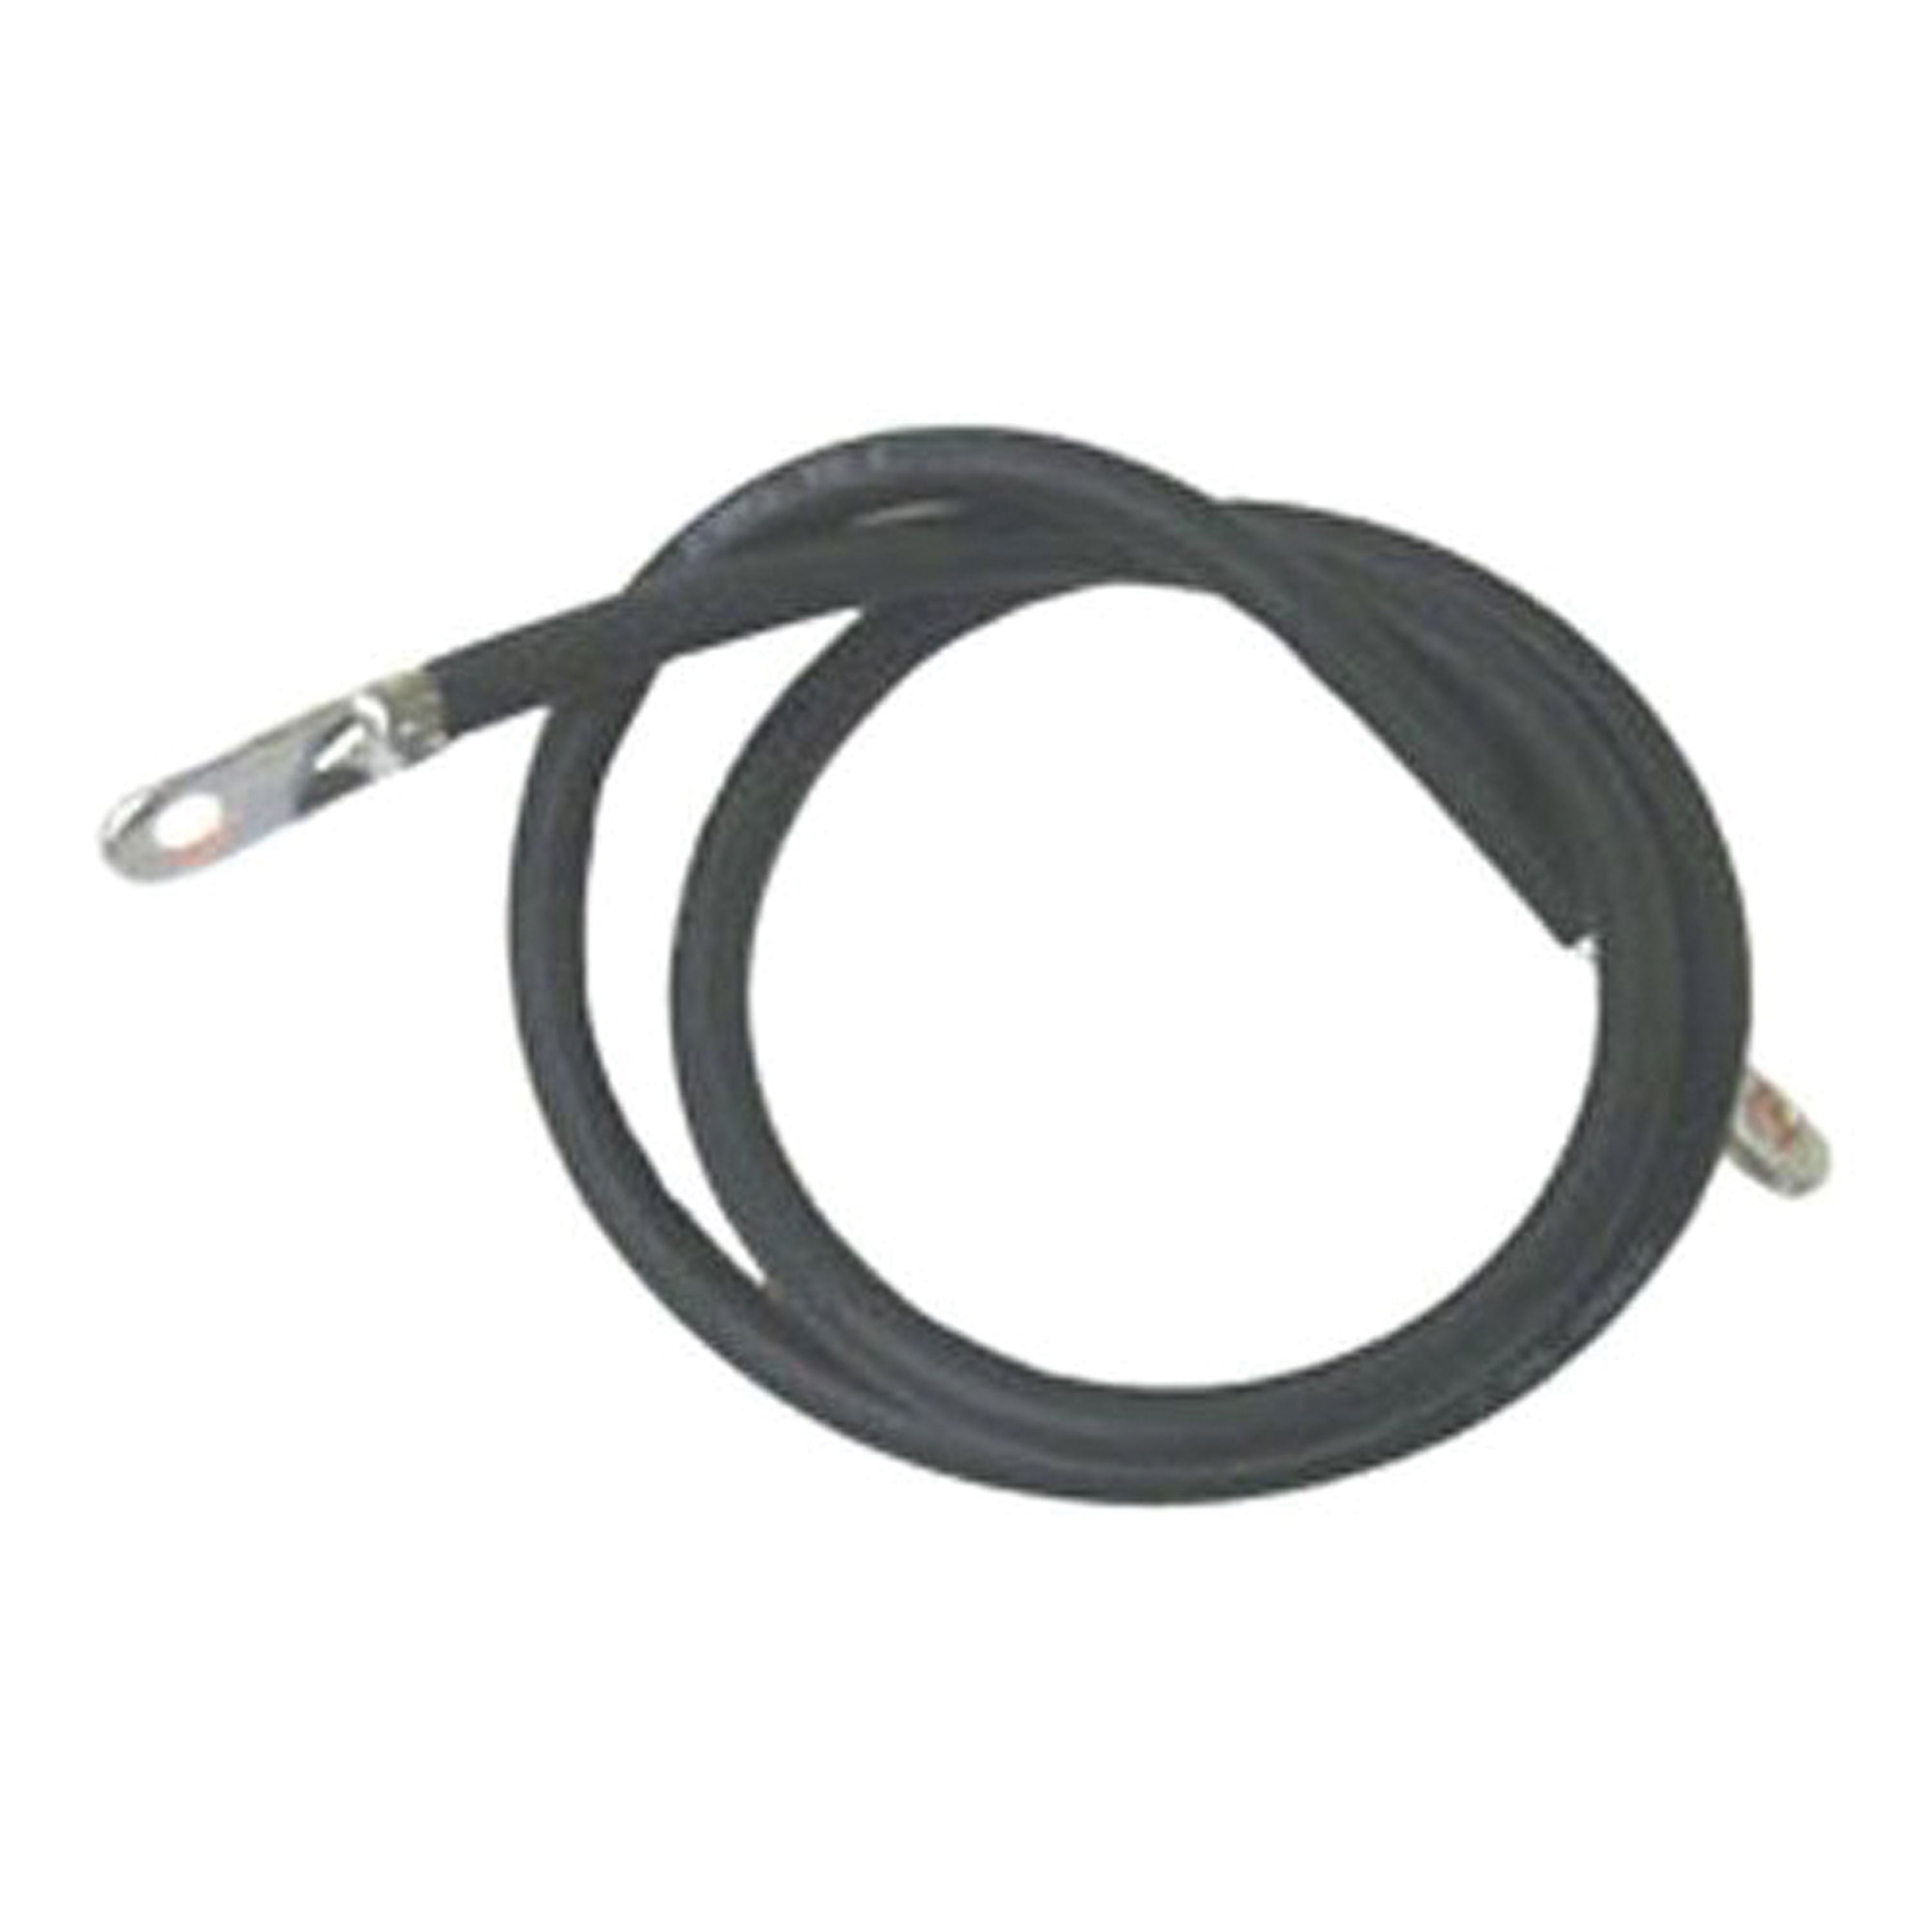 Sierra BC88553 Battery Cable With Terminals - 4 ft. Black, 2 Gauge